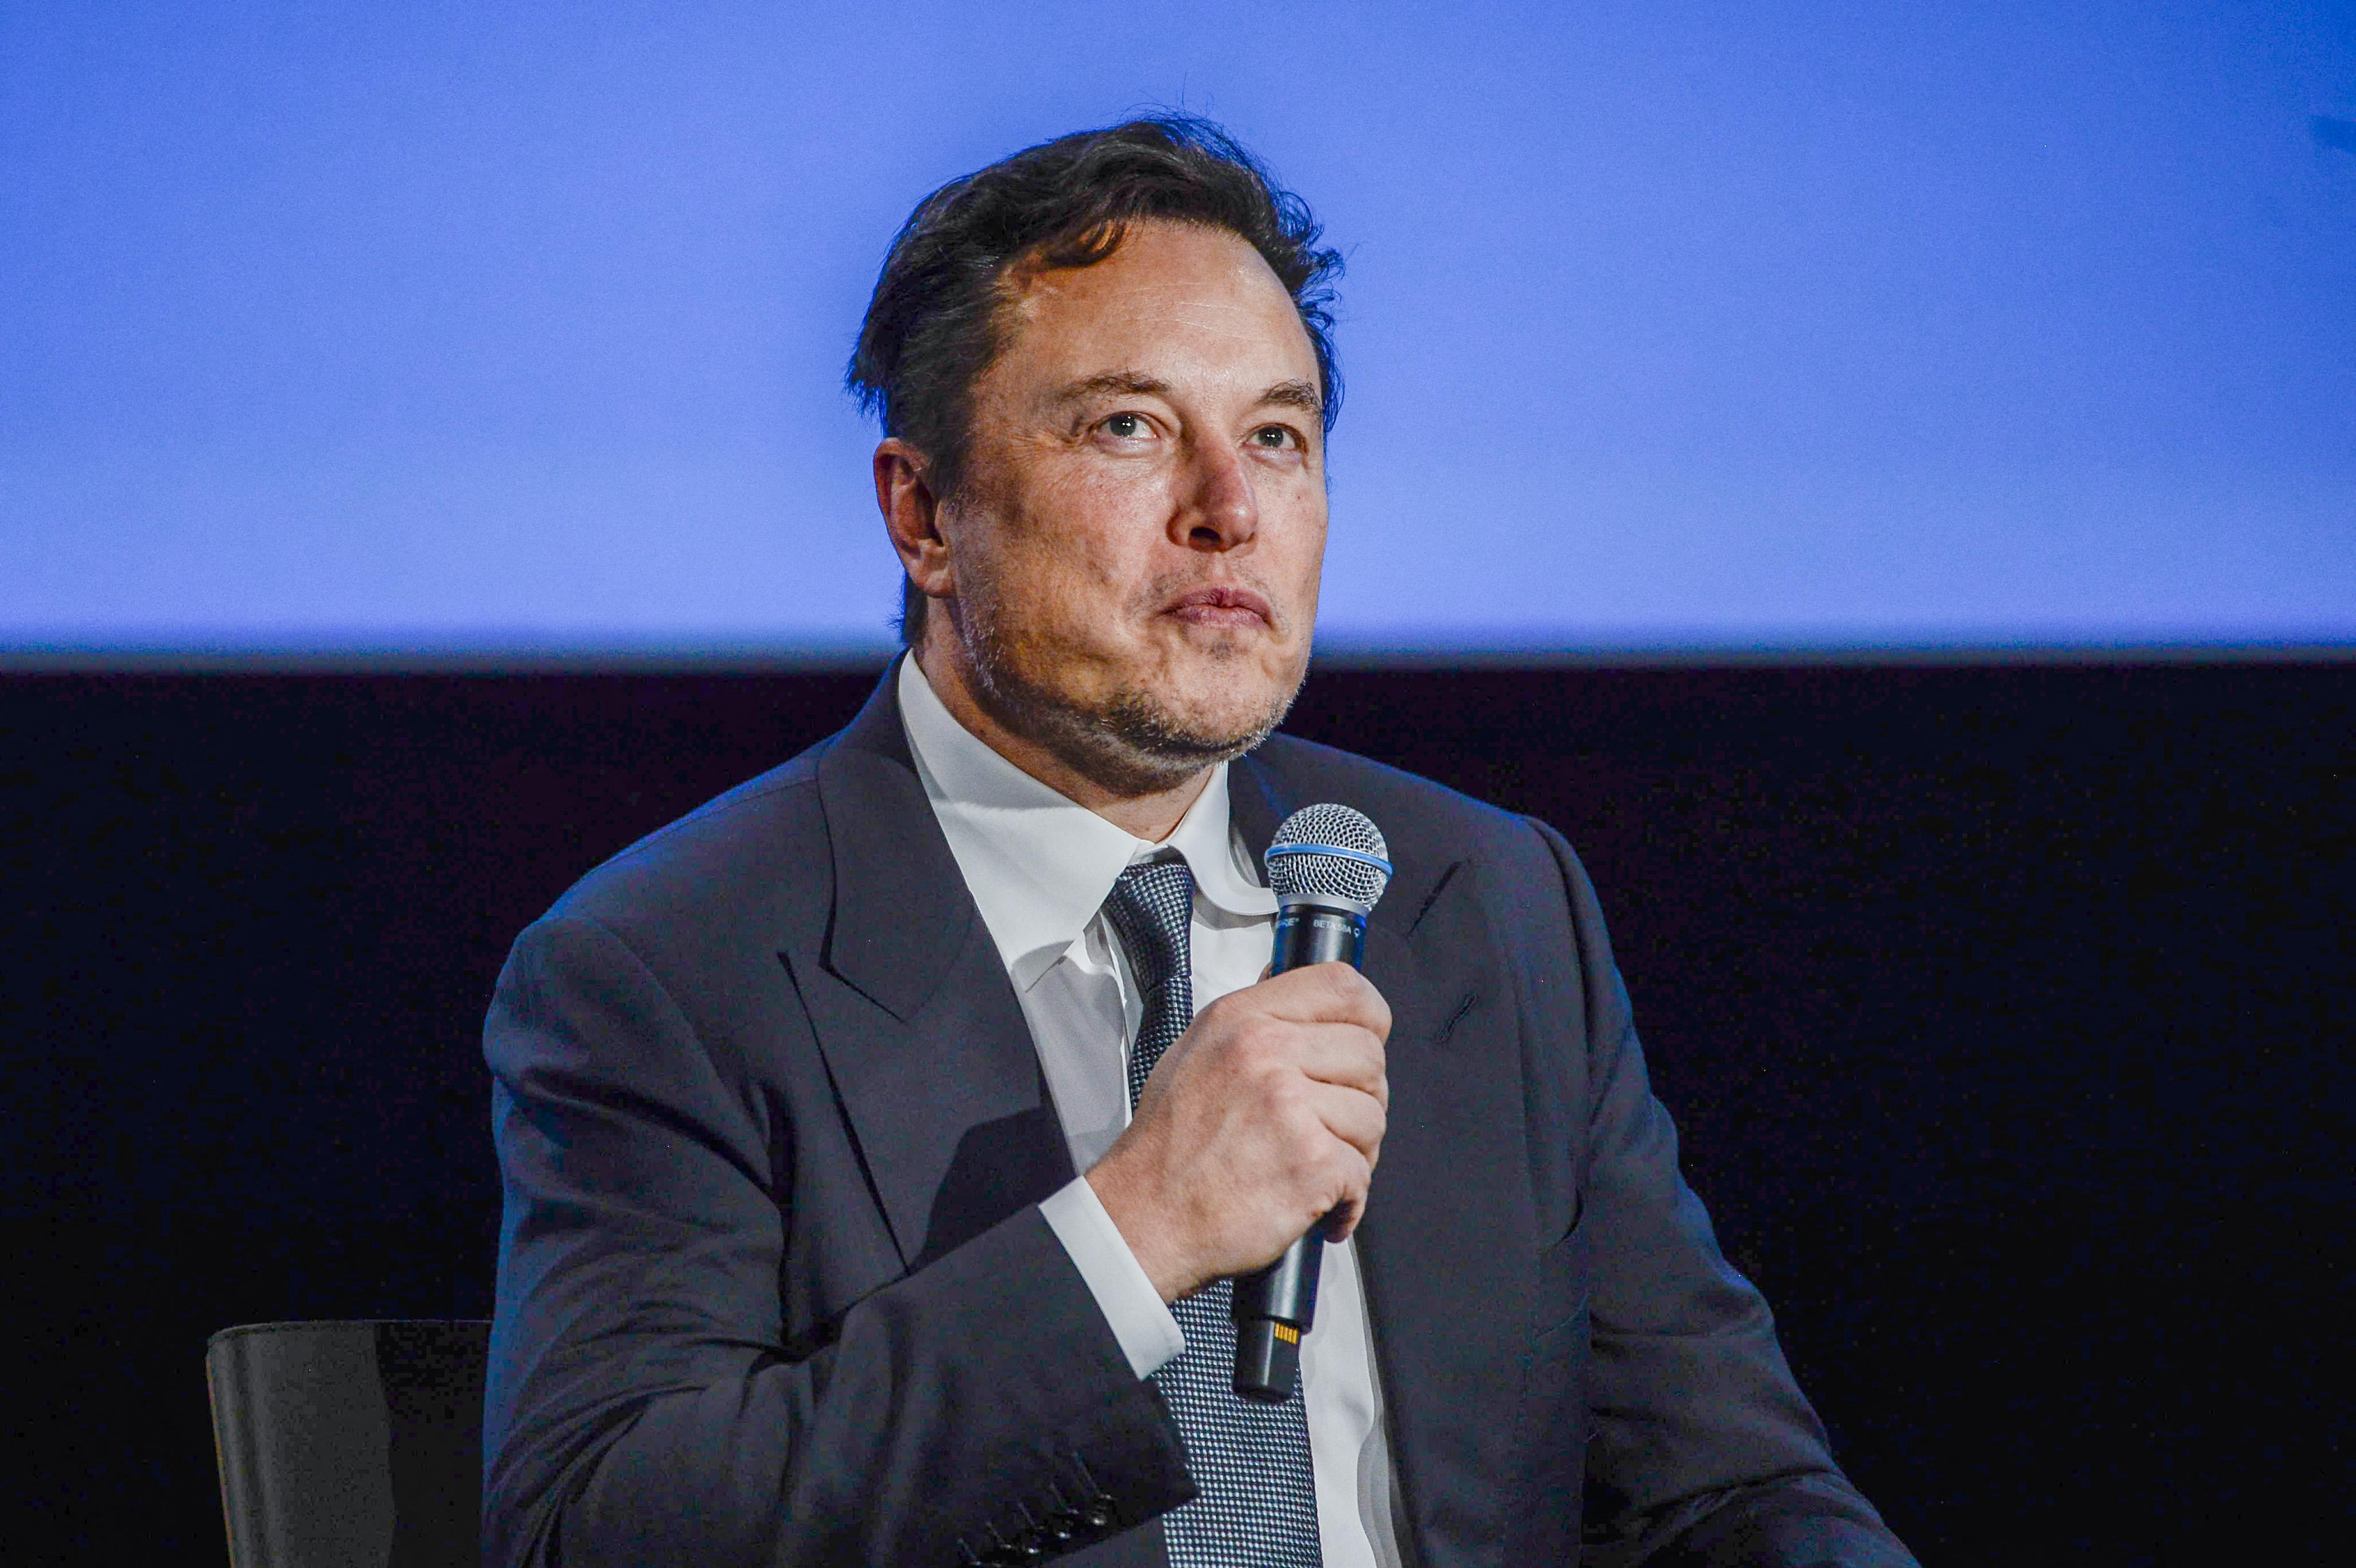 Elon Musk gazes out at an audience.